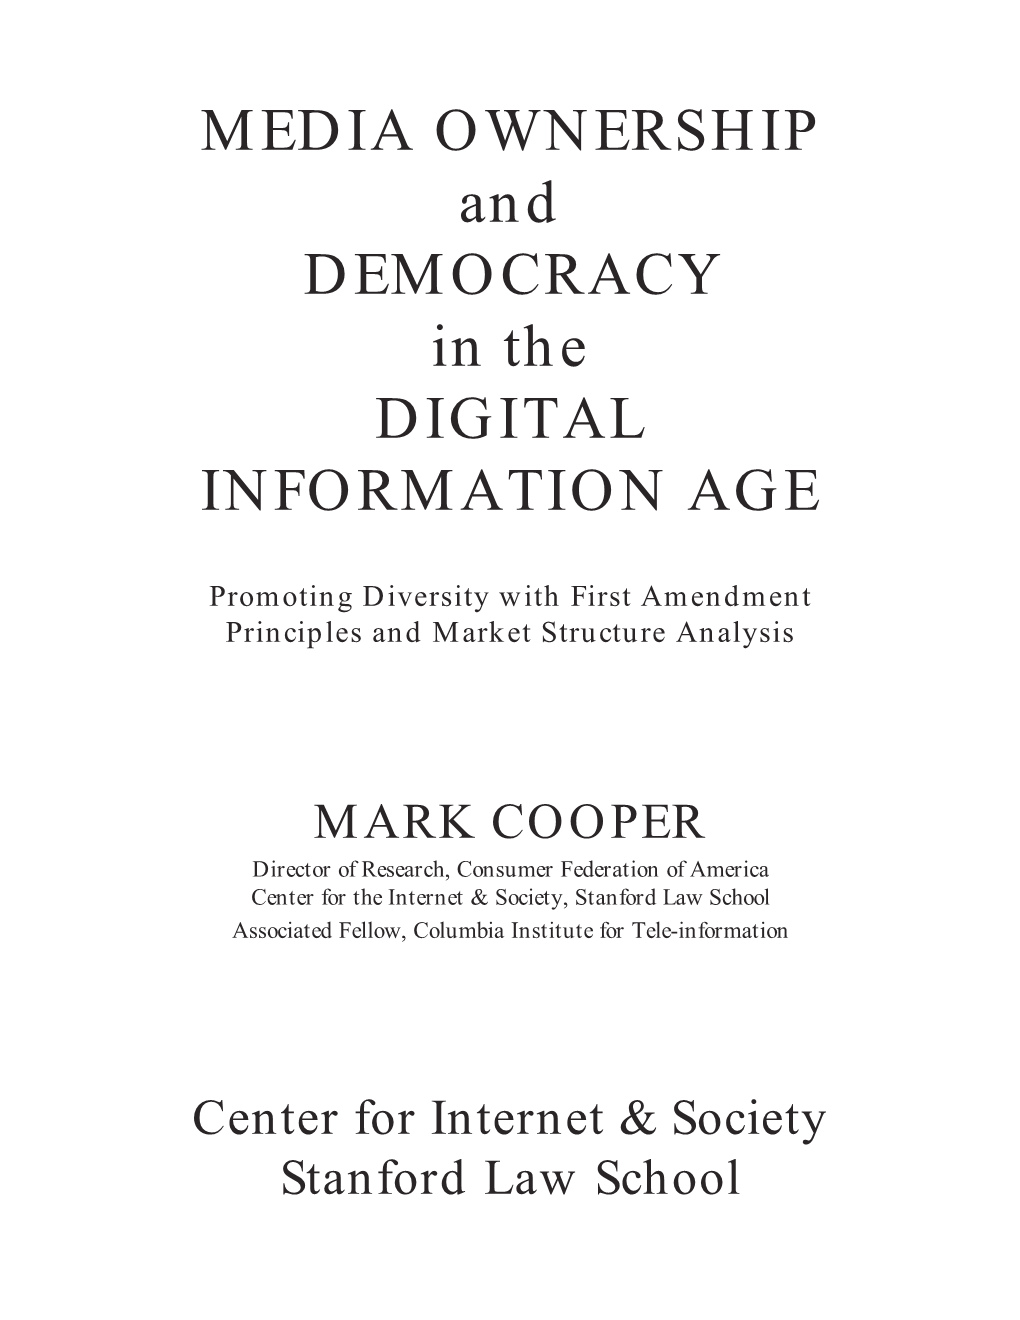 MEDIA OWNERSHIP and DEMOCRACY in the DIGITAL INFORMATION AGE